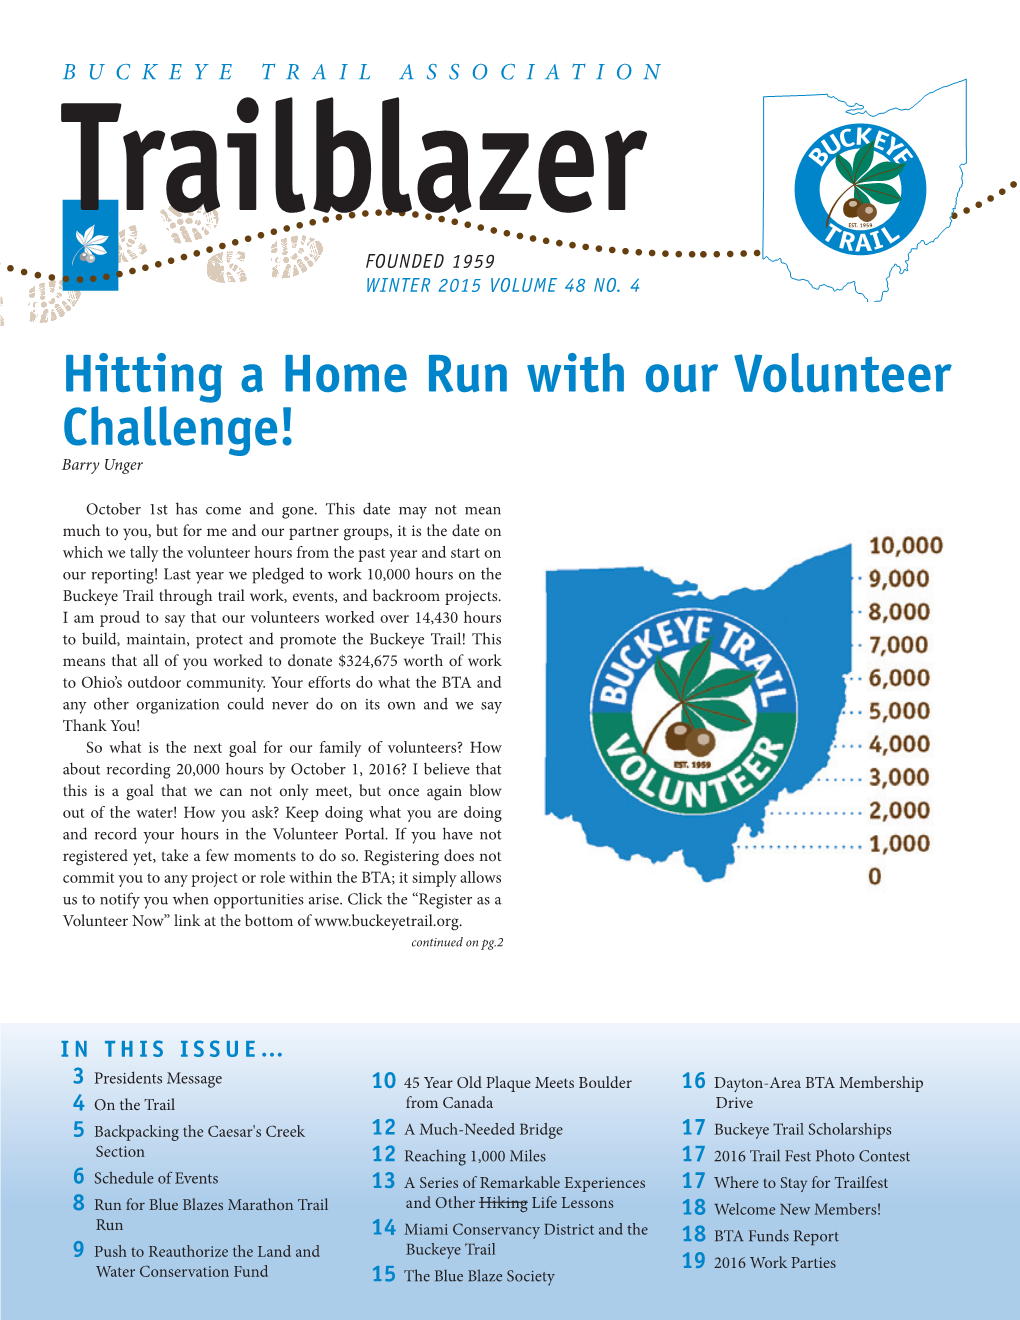 Hitting a Home Run with Our Volunteer Challenge! Barry Unger